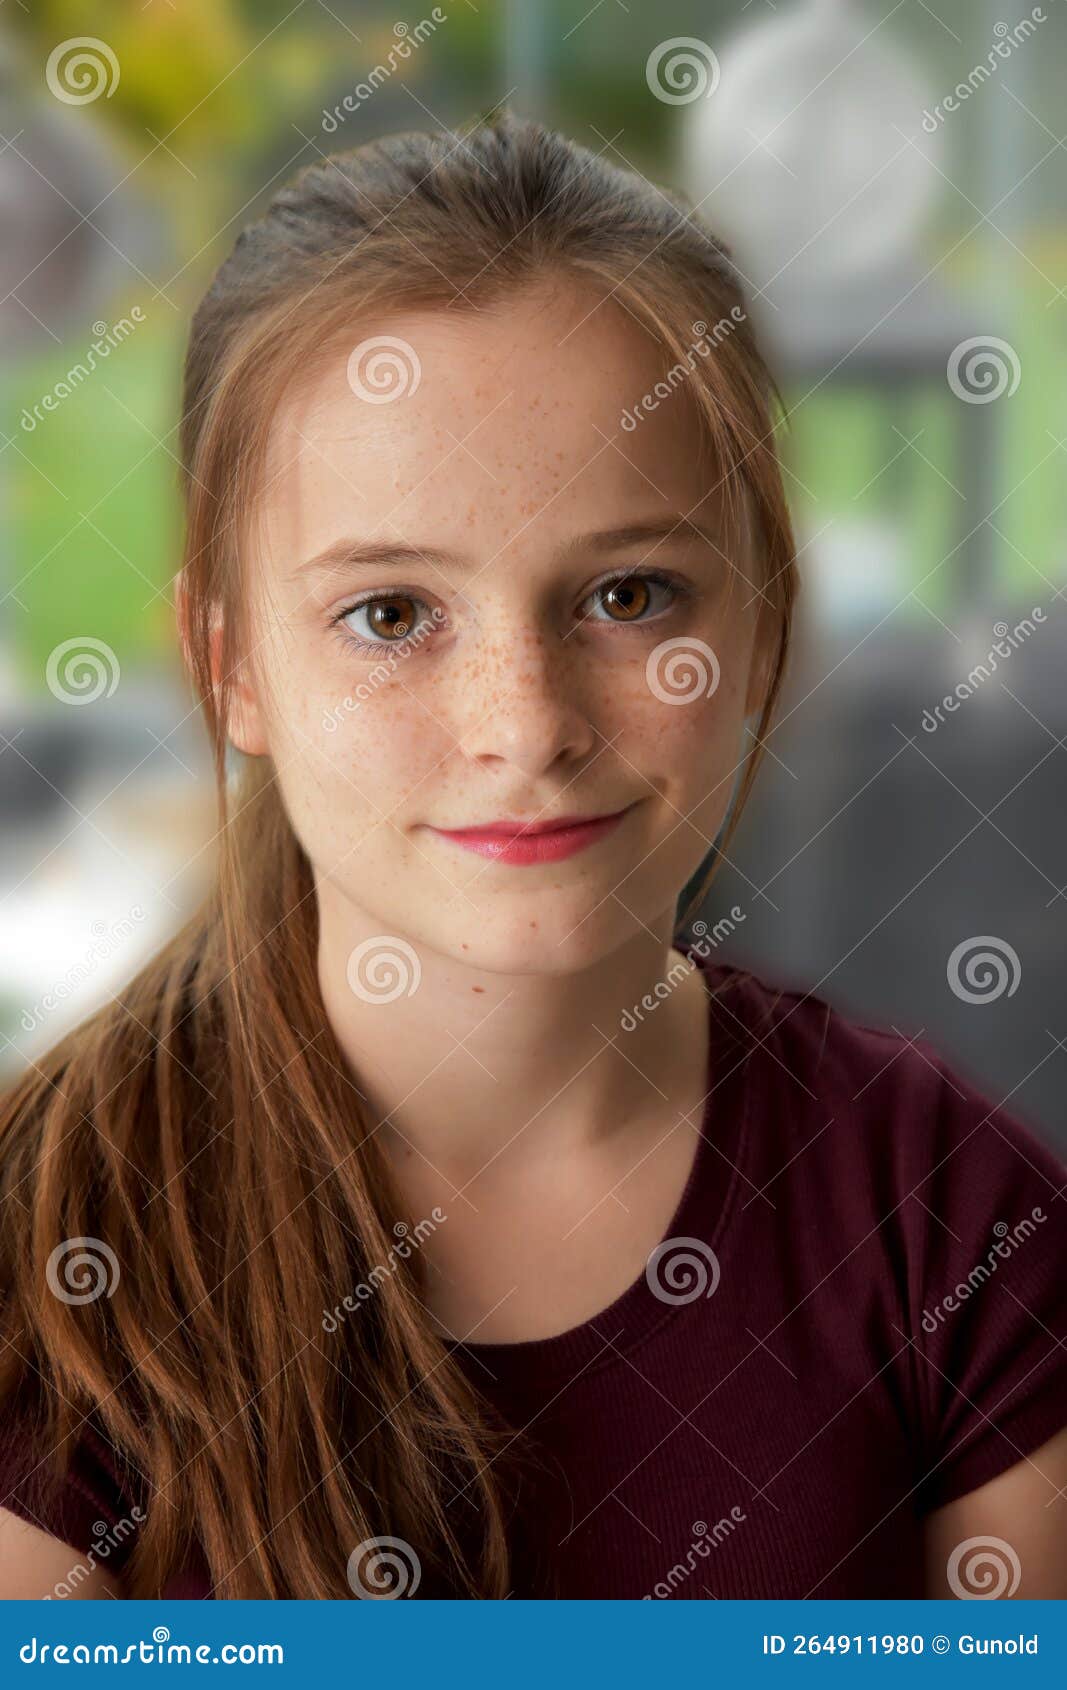 cheerful teenager girl with freckles